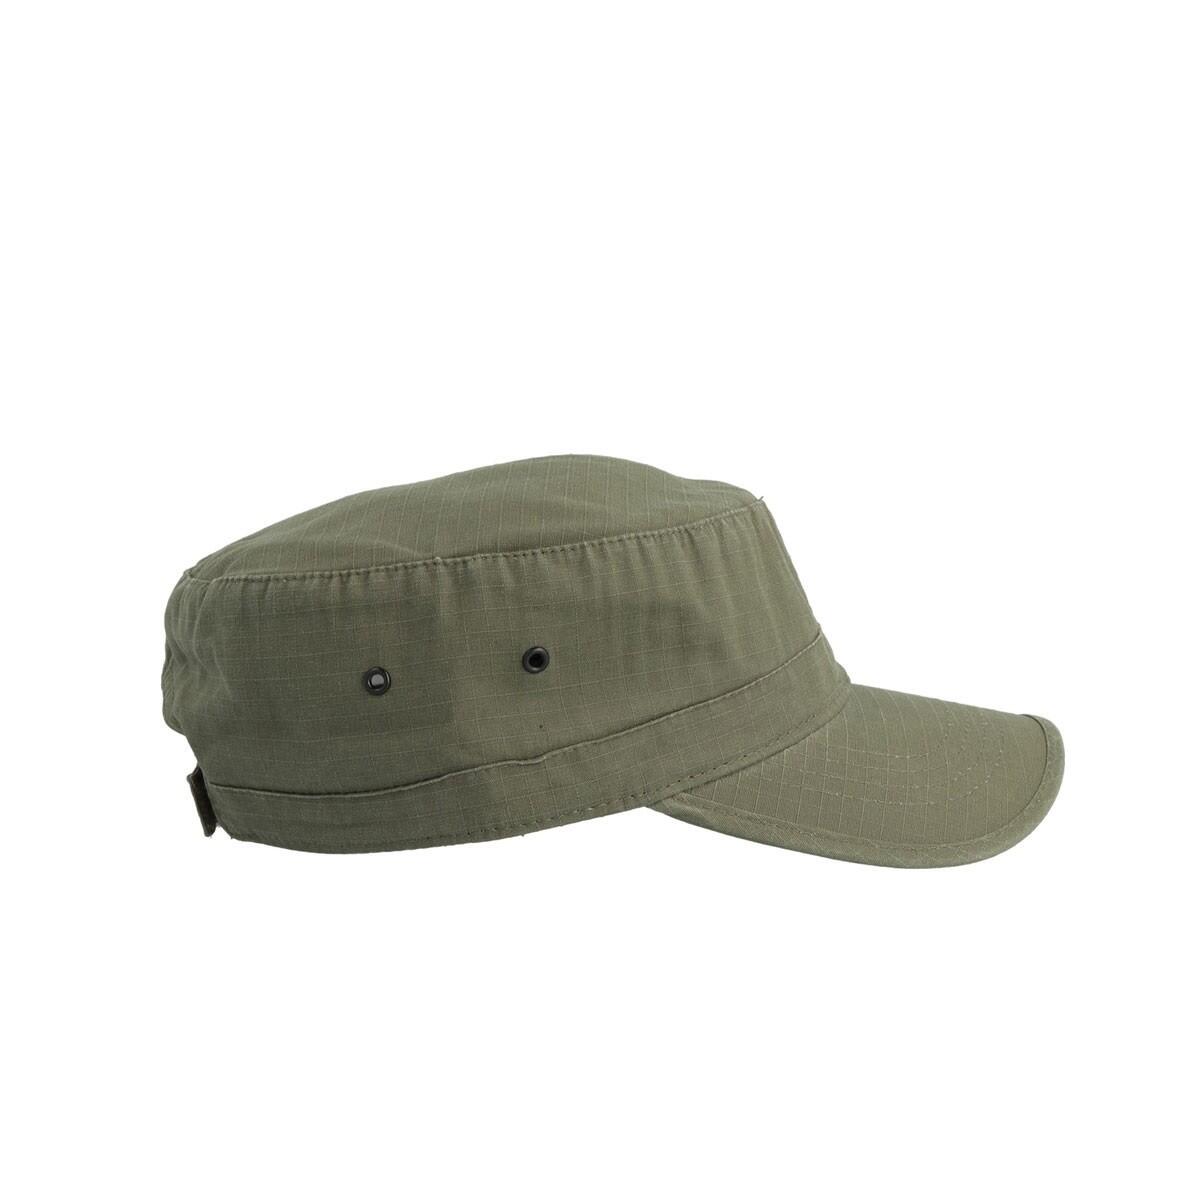 Army Military Cap (Green) 4/4